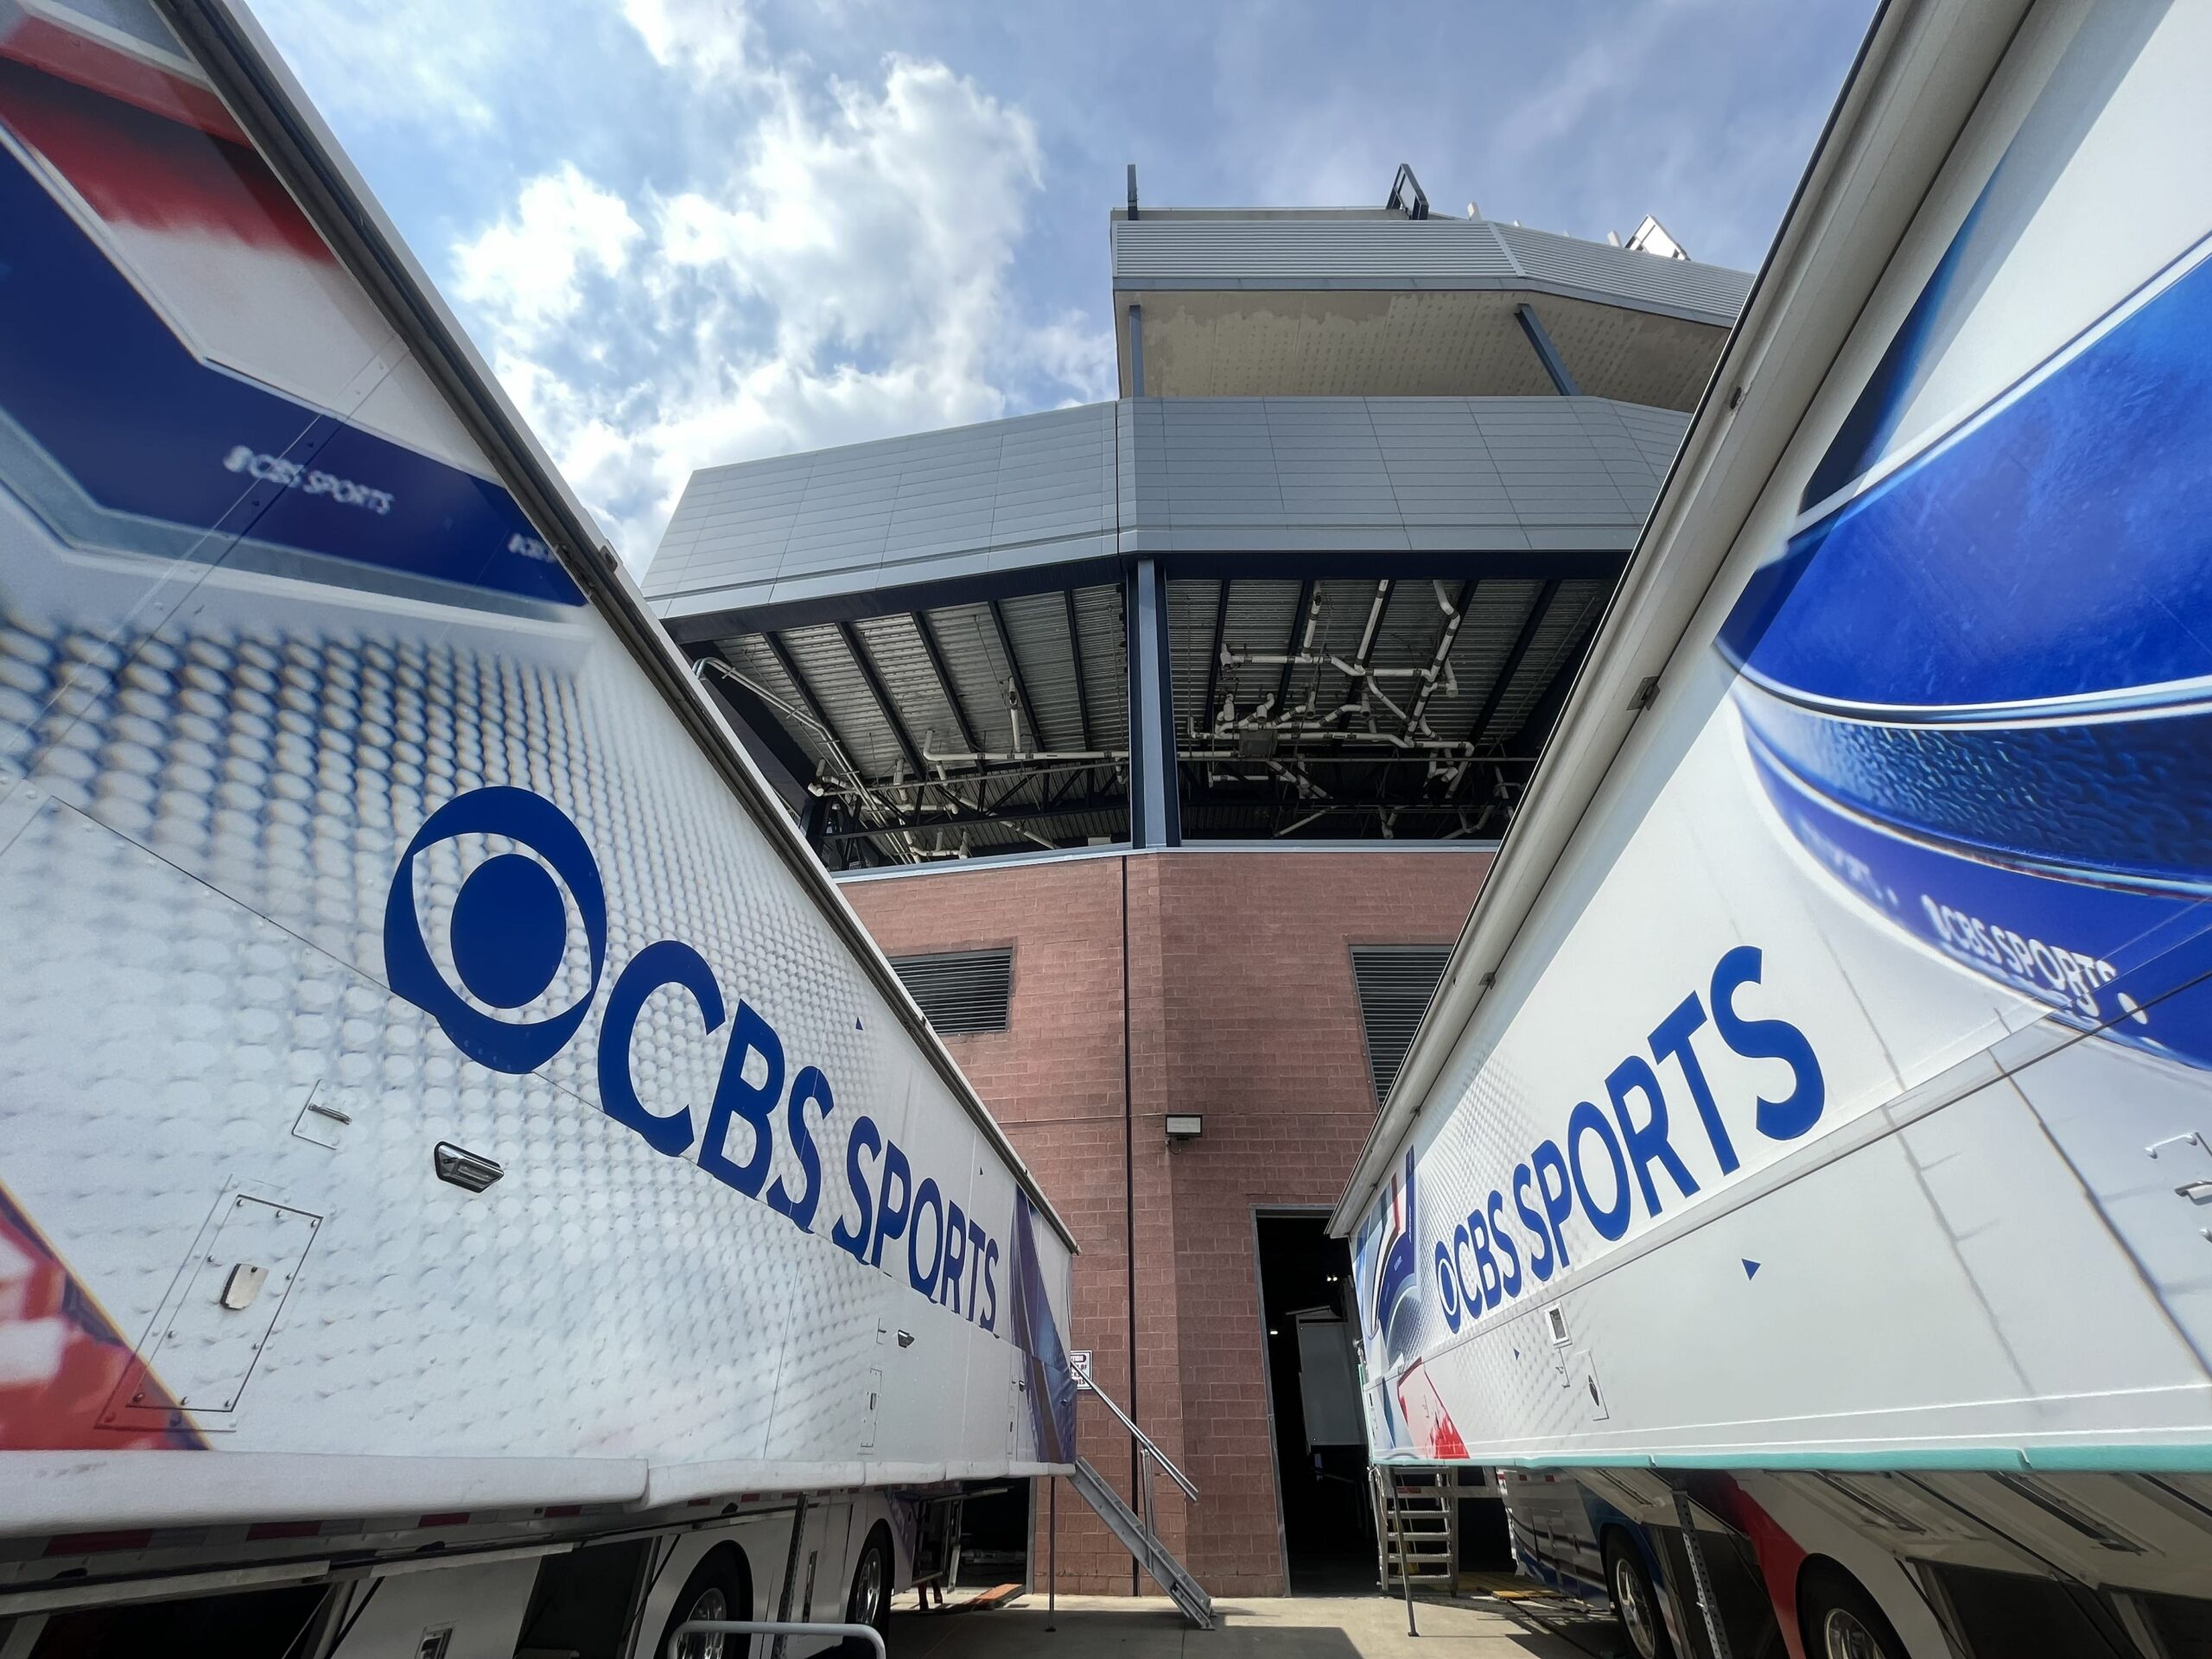 NFL Kickoff 2023: With Eyes on Las Vegas, CBS Sports Upgrades Supershooter  CBS Truck for Capture in 1080p HDR